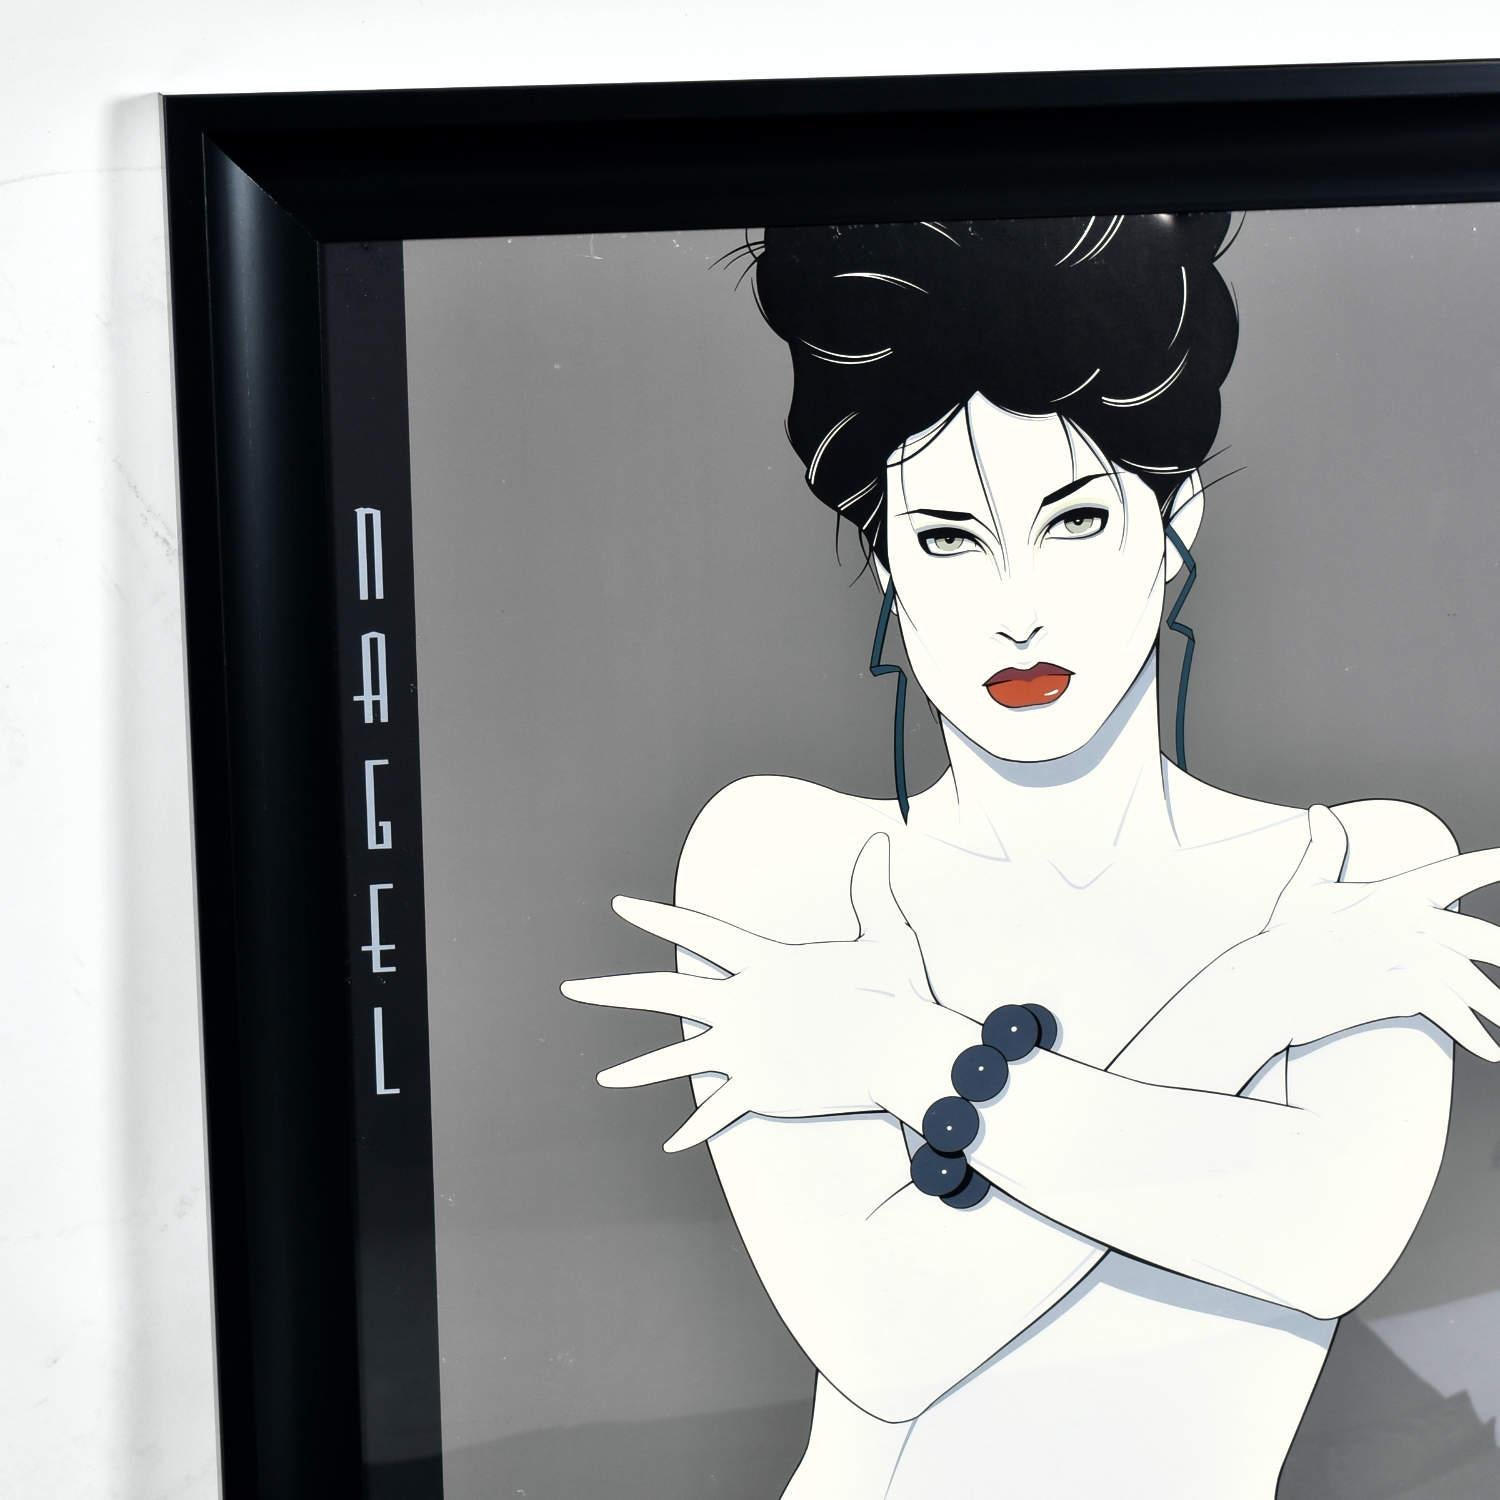 Vintage 1980s Patrick Nagel poster in new frame. This vintage poster is actually mounted to foam core. The original poster is housed in a new black poster frame with acrylic panel protecting the art.

Framed size: 28.5” Wide x 1” Deep x 40.5”